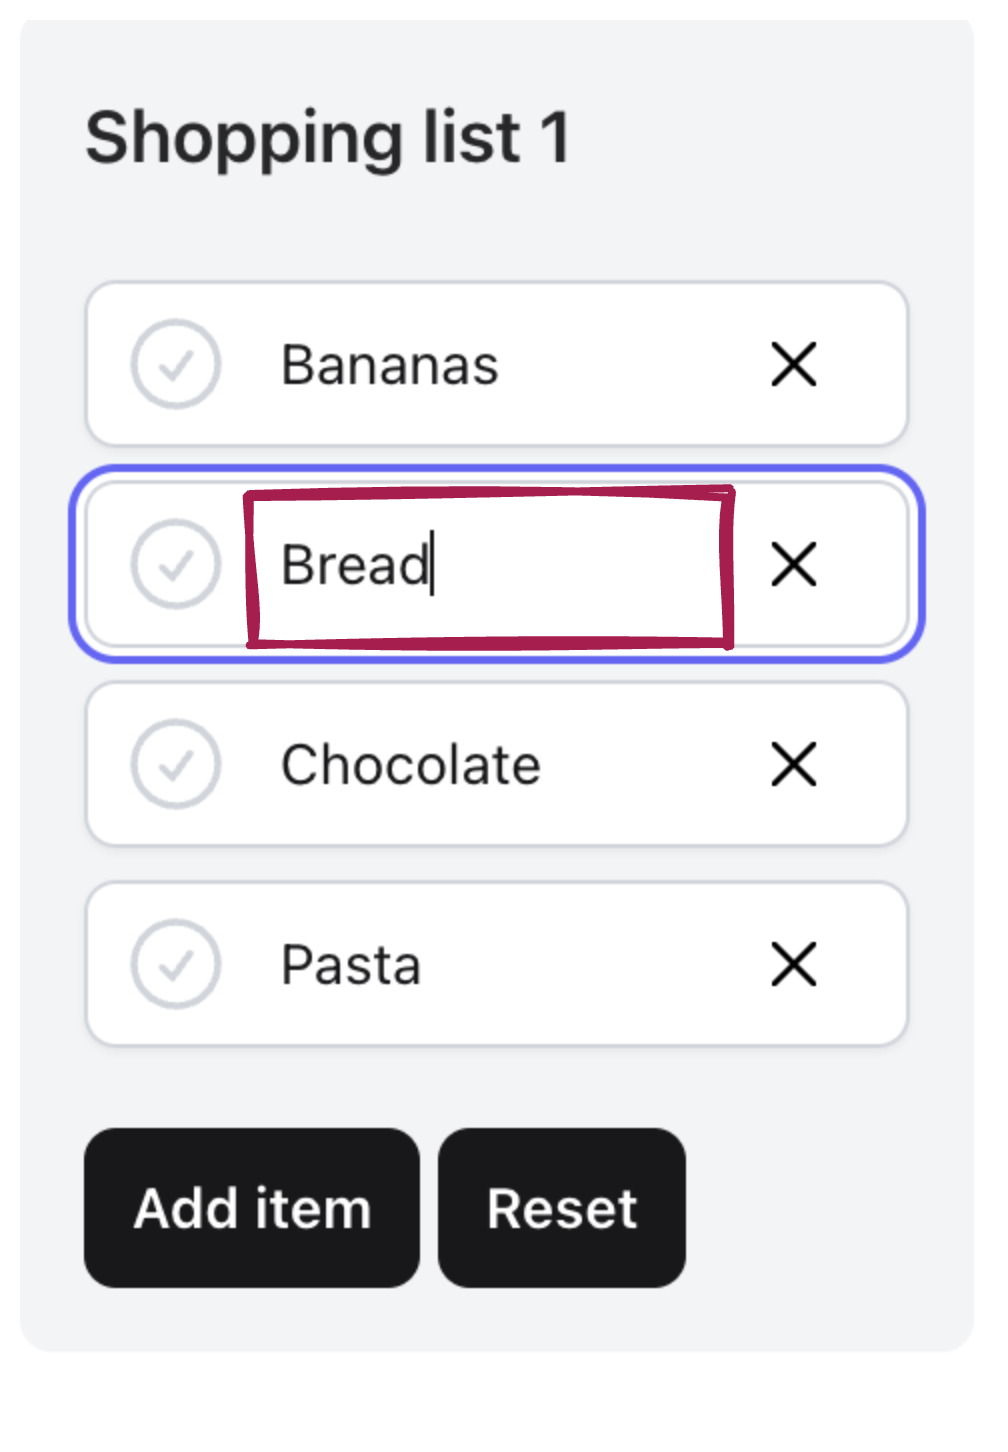 This is a screenshot of the shopping list component. In the screenshot, there is a text input field highlighted. This text input field is used to create new items or update existing ones in the shopping list.